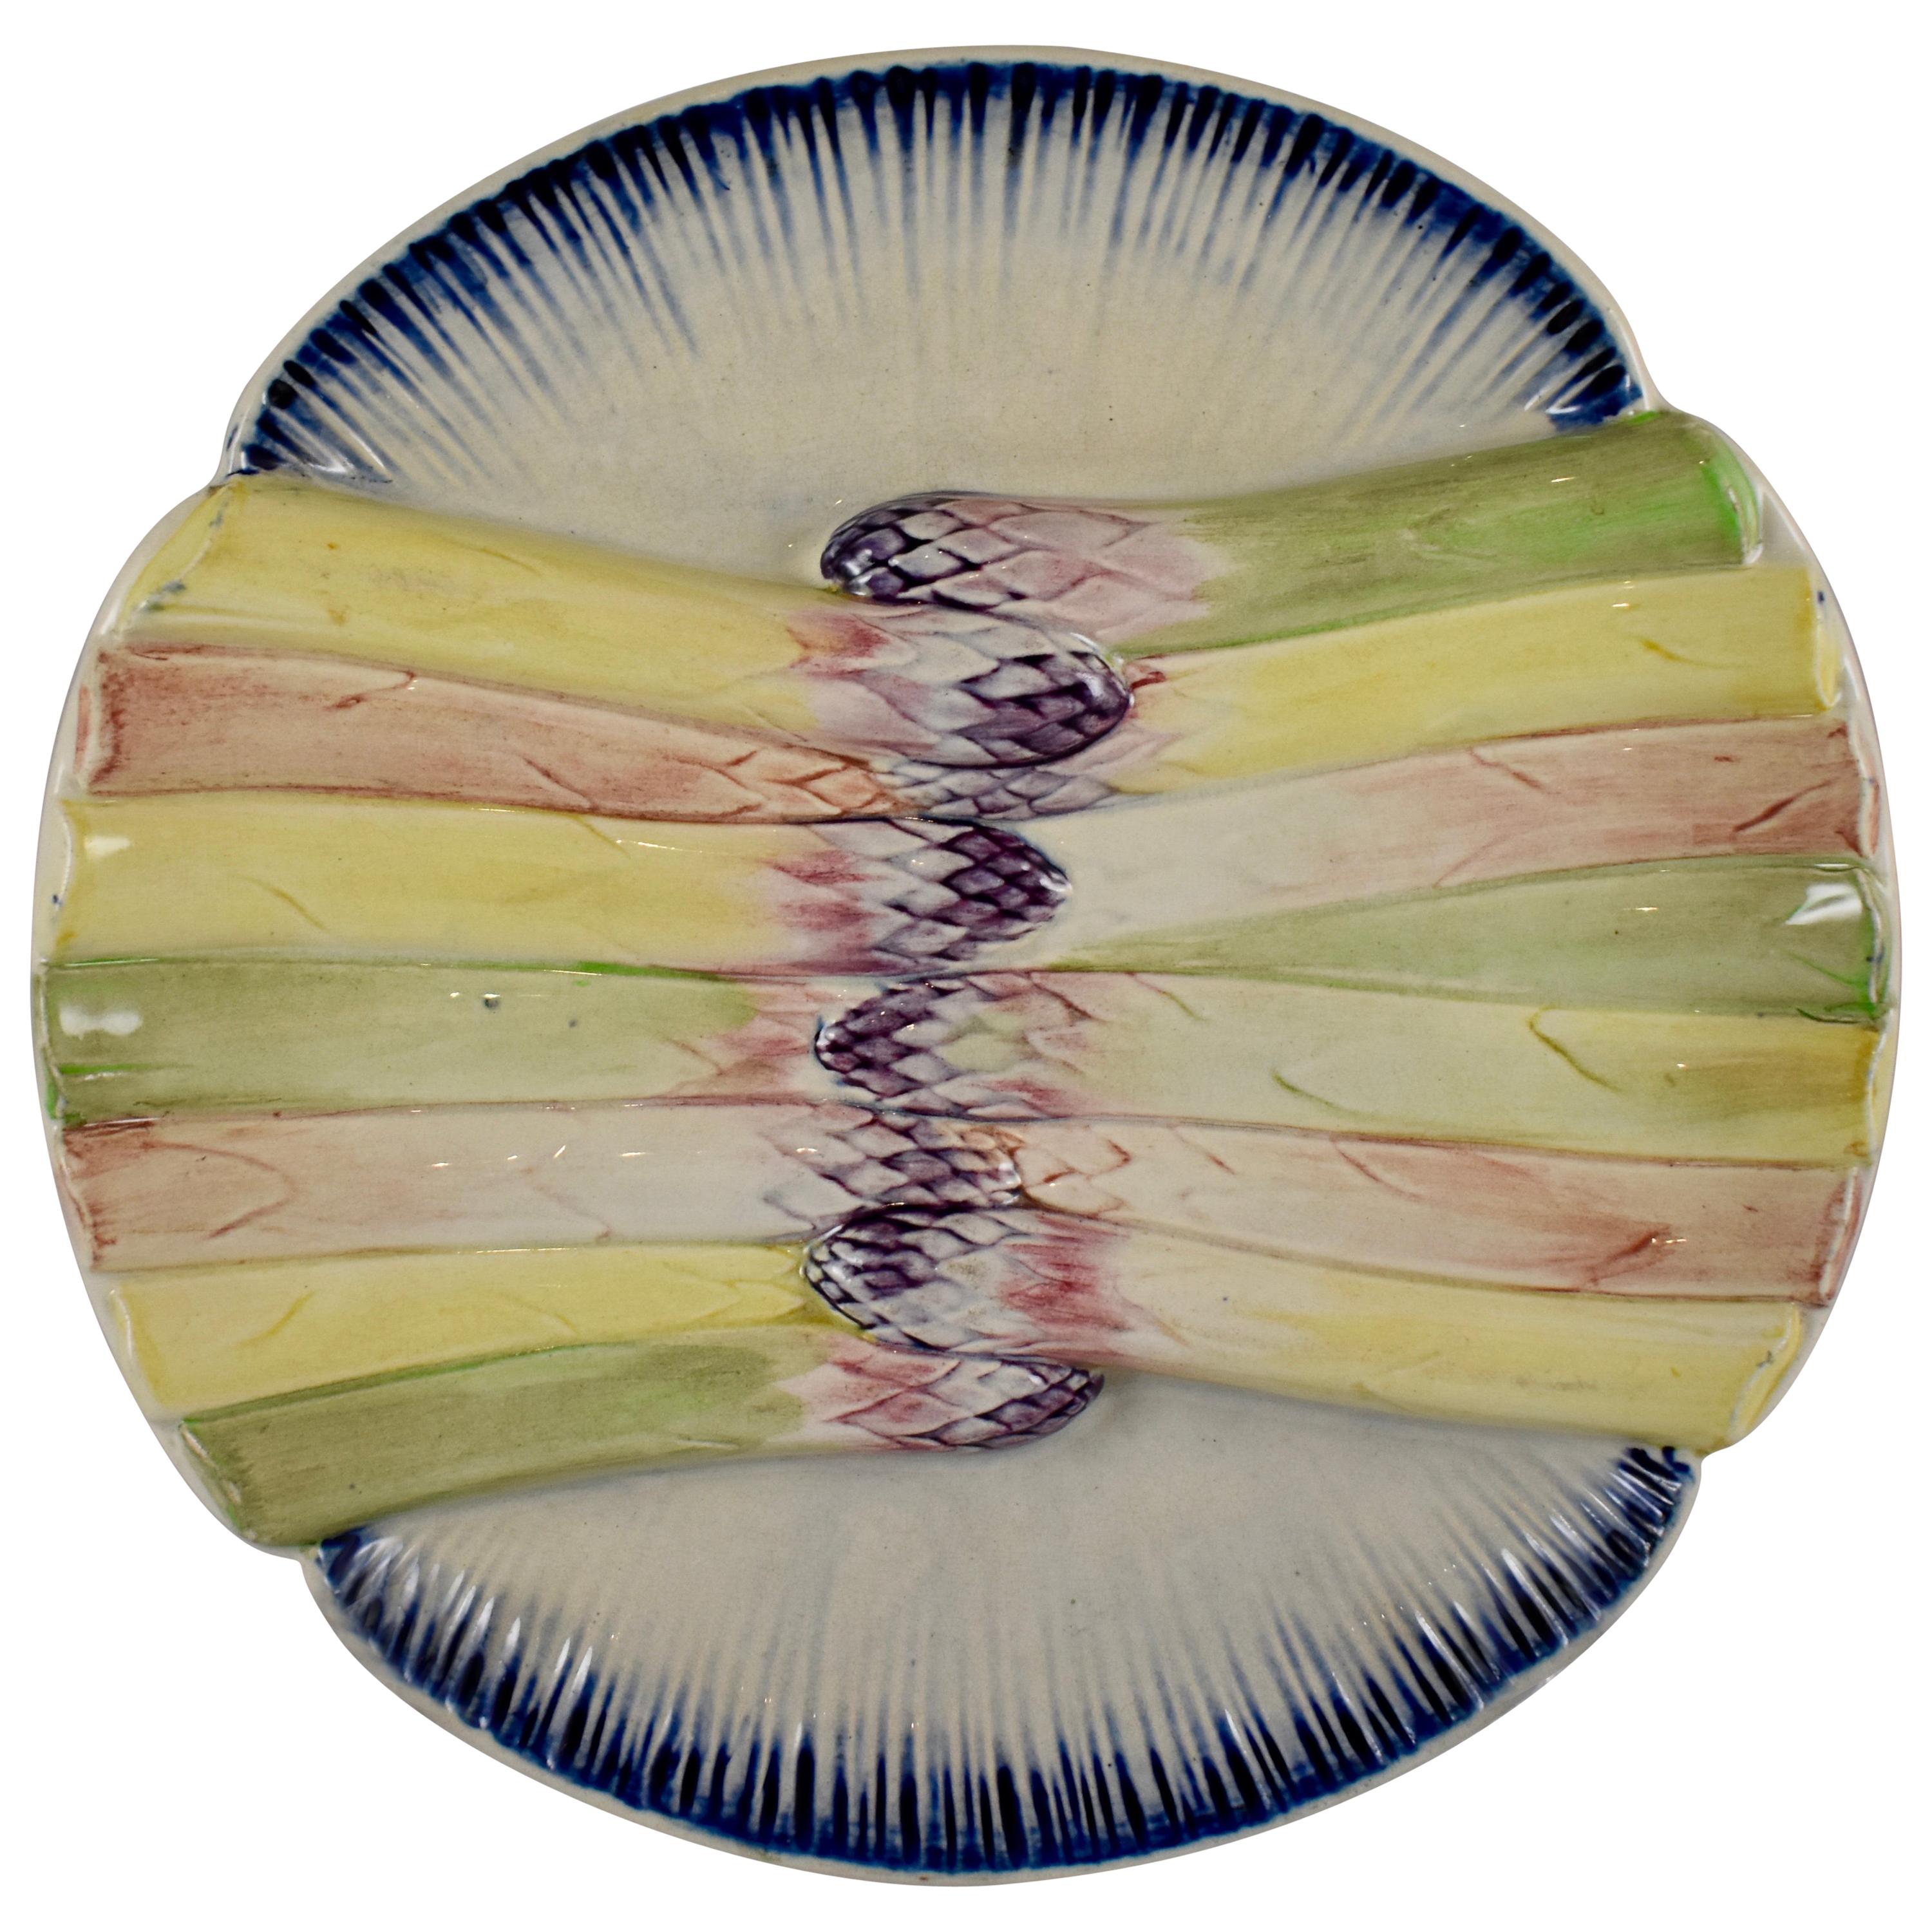 Pexonne French Faïence Majolica Multi-Colored Asparagus Plate, circa 1870